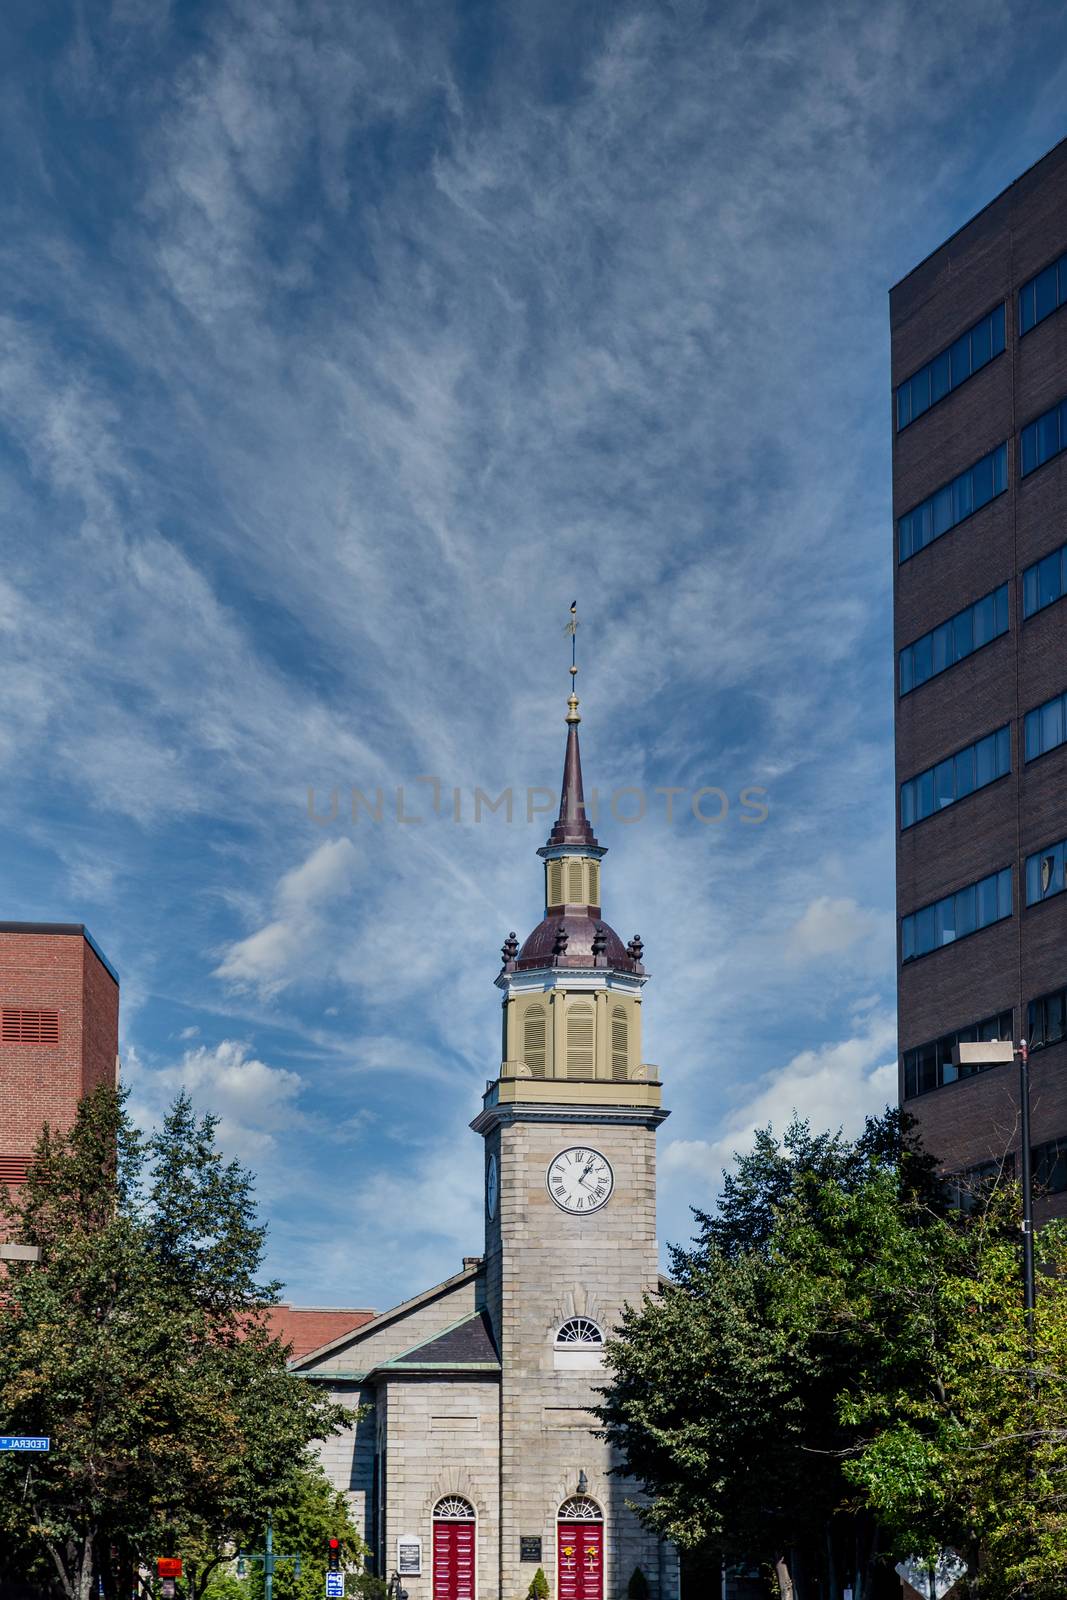 Stone Church Steeple and Clock Tower by dbvirago